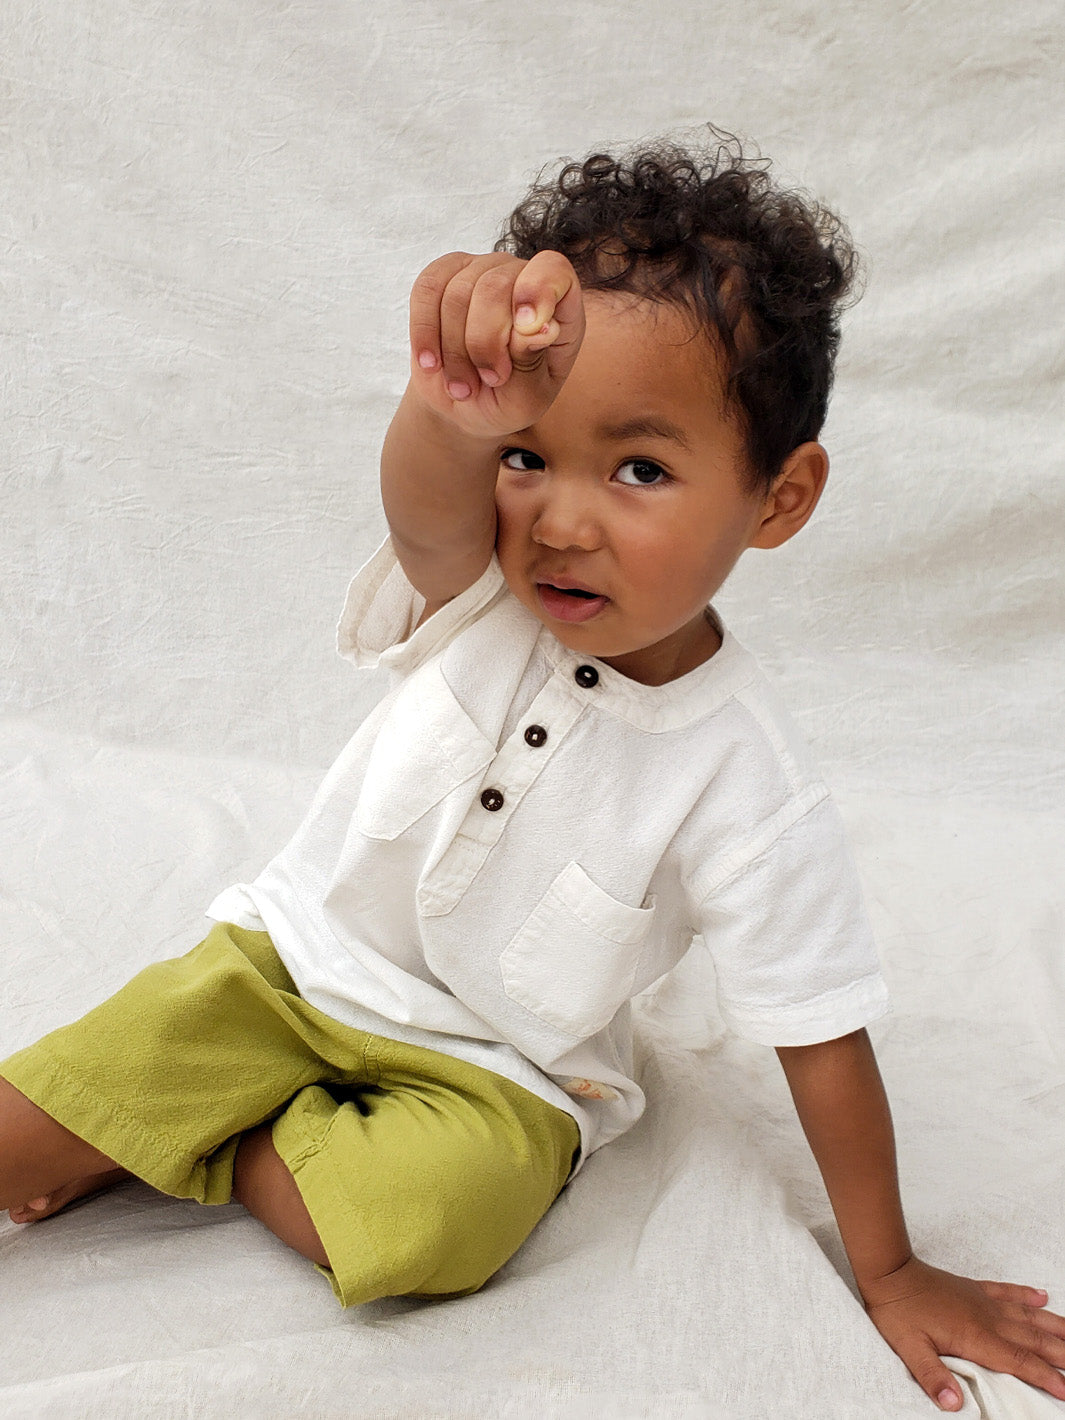 Liten Aventuris Natural Tocuyo Cotton shirt for kids. The Philipo shirt is perfect for a picnic at a lake or a nice morning stroll! This short sleeve shirt with coconut buttons and tunisian collar is casual and chic at the same time. This loose-fitting shirt with two pockets, is comfortable and soft with the skin. Ethically made in Peru. Bomullskläder, barnkläder, Pojken tröja, Skjortor, Natural kläder, ekologisk kläder.